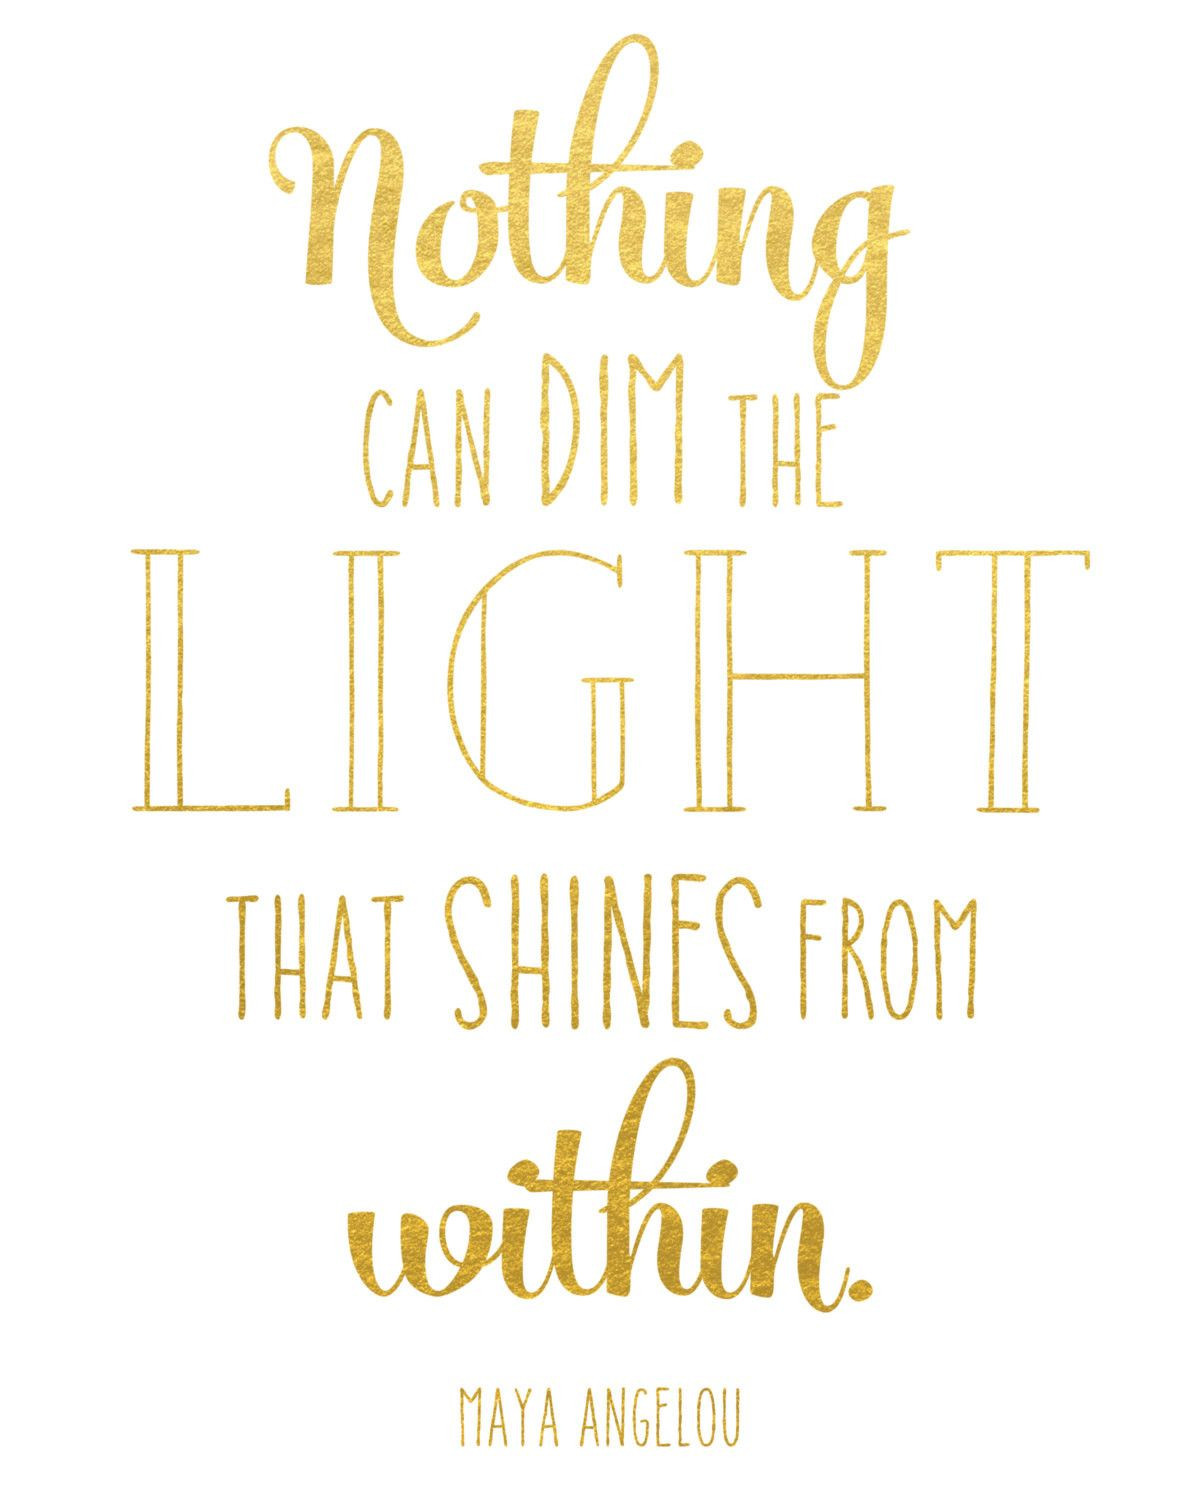 Maya Angelou Graduation Quotes
 Nothing Can Dim the Light Print